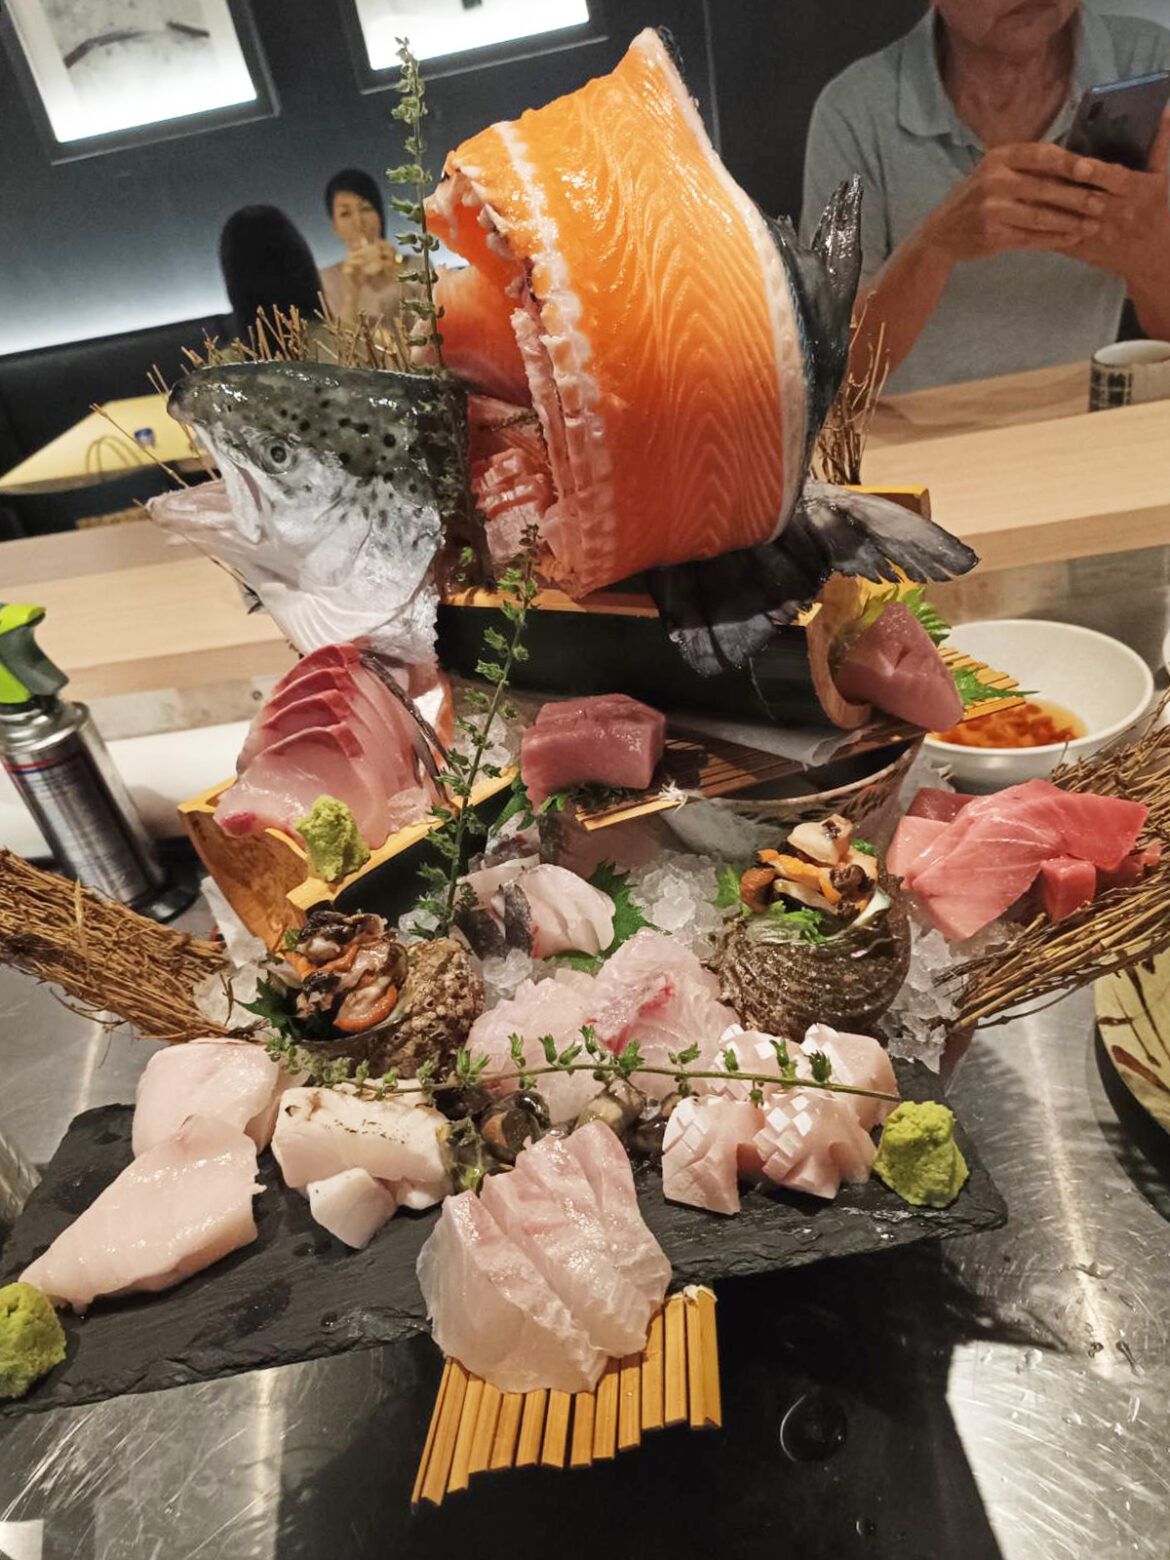 The Maguro Father マグロ　寿司　宴会　ランチ飲み放題